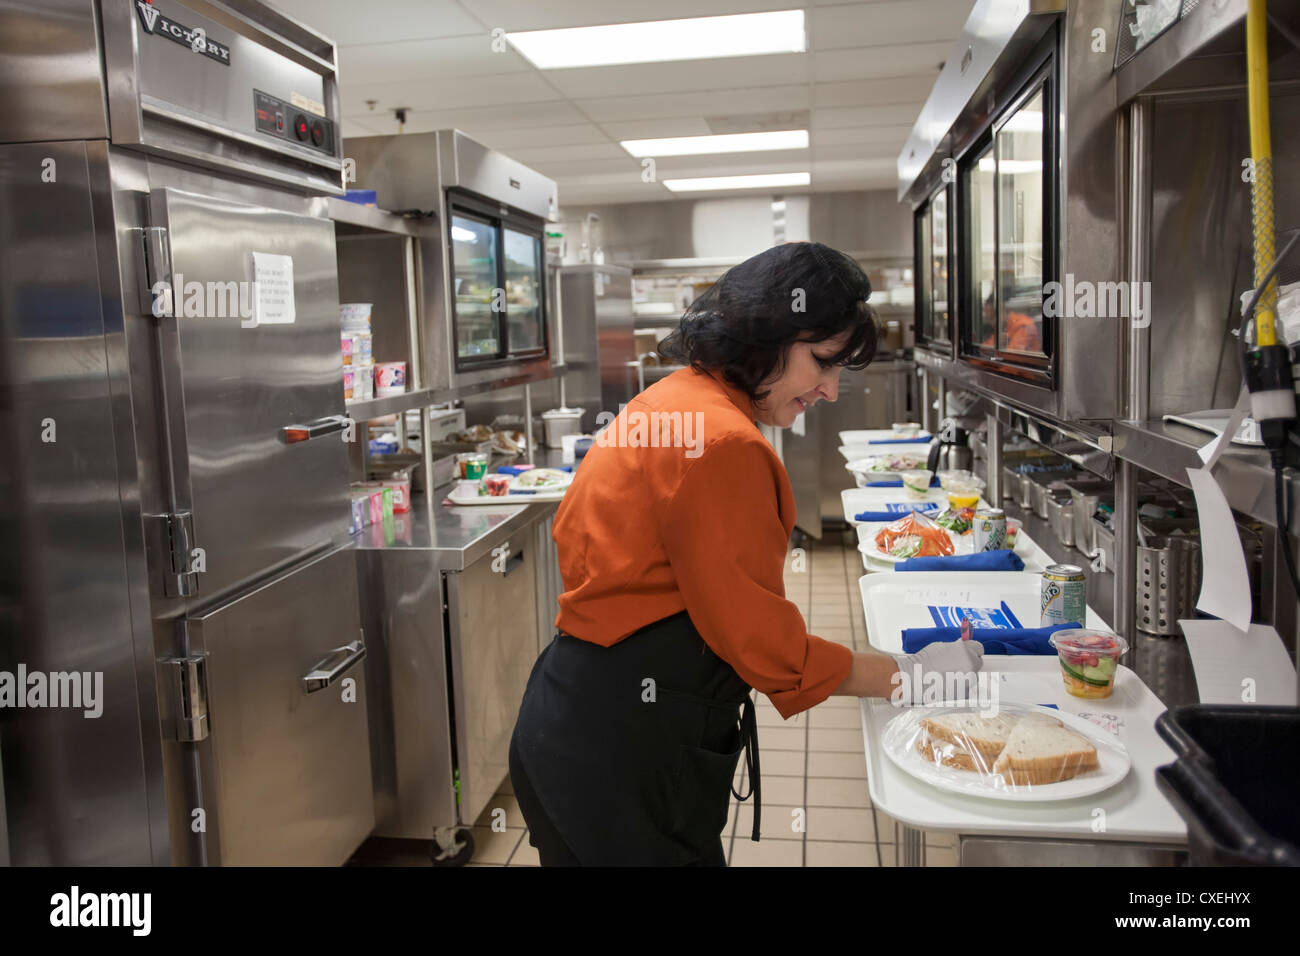 Kitchen Worker Prepares Lunch For Patients At Henry Ford Hospital CXEHYX 